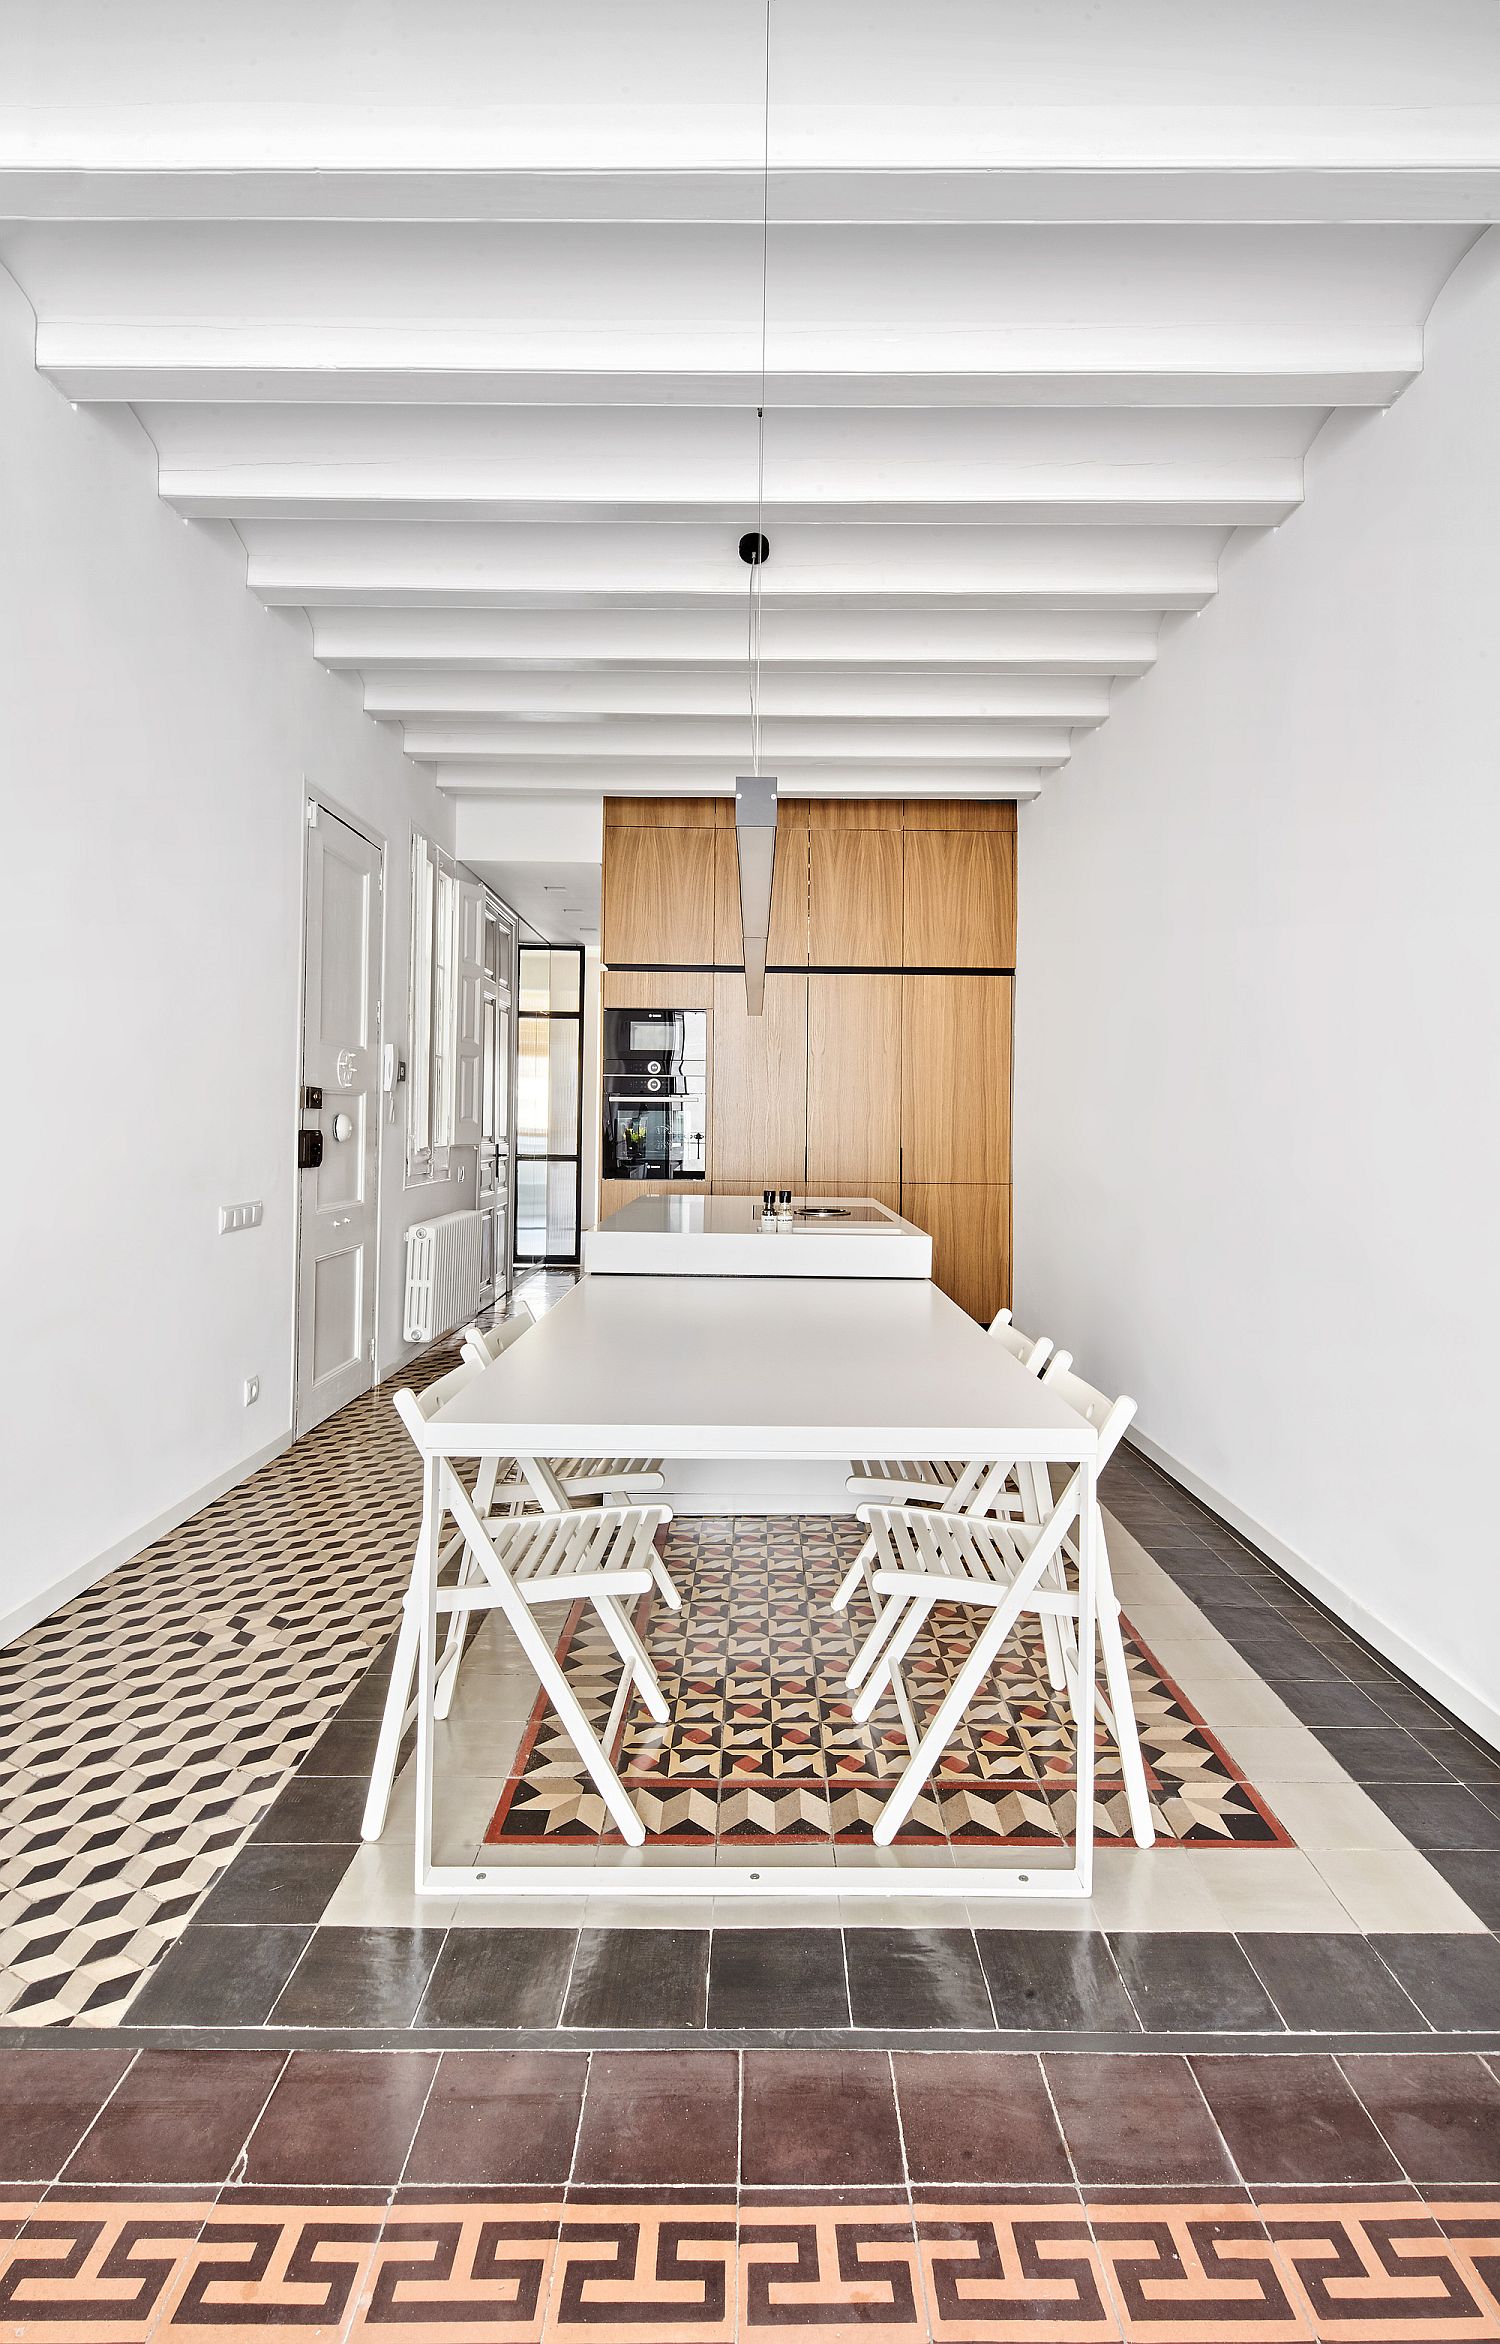 Dining area and kitchen of the revamped Barcelona apartment